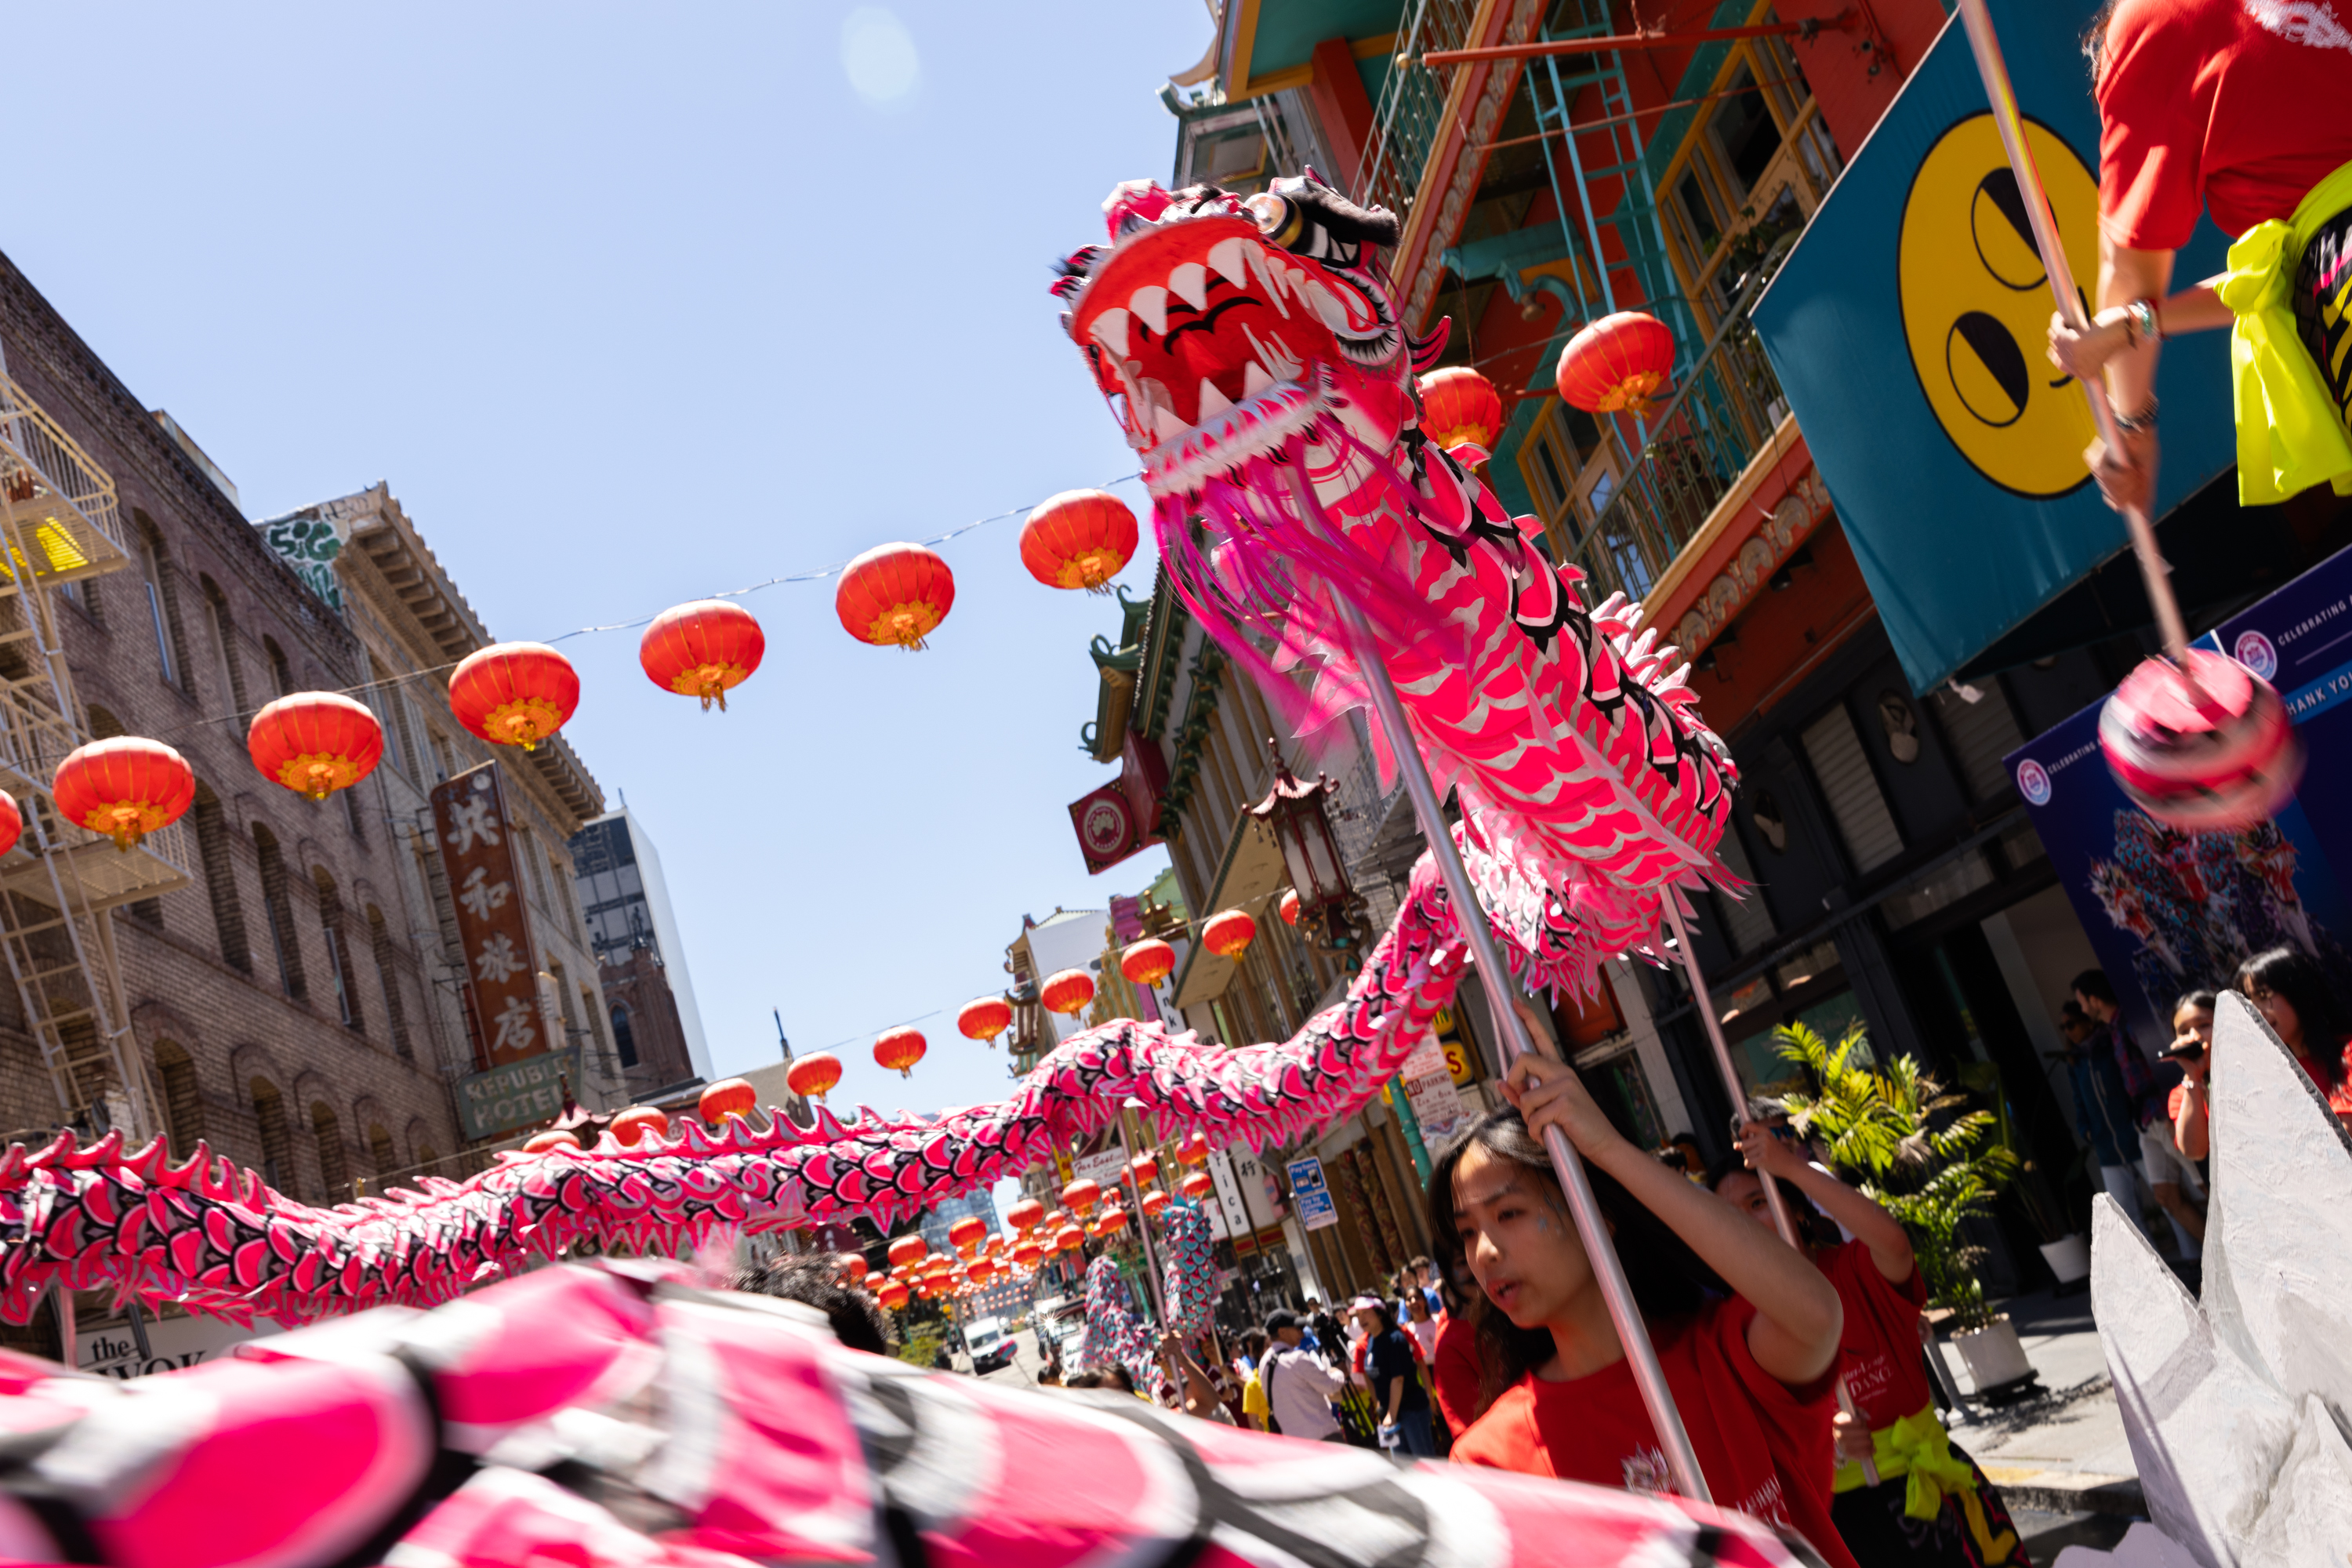 A bright dragon dance in a vibrant street with red lanterns above, performers in red partly visible.